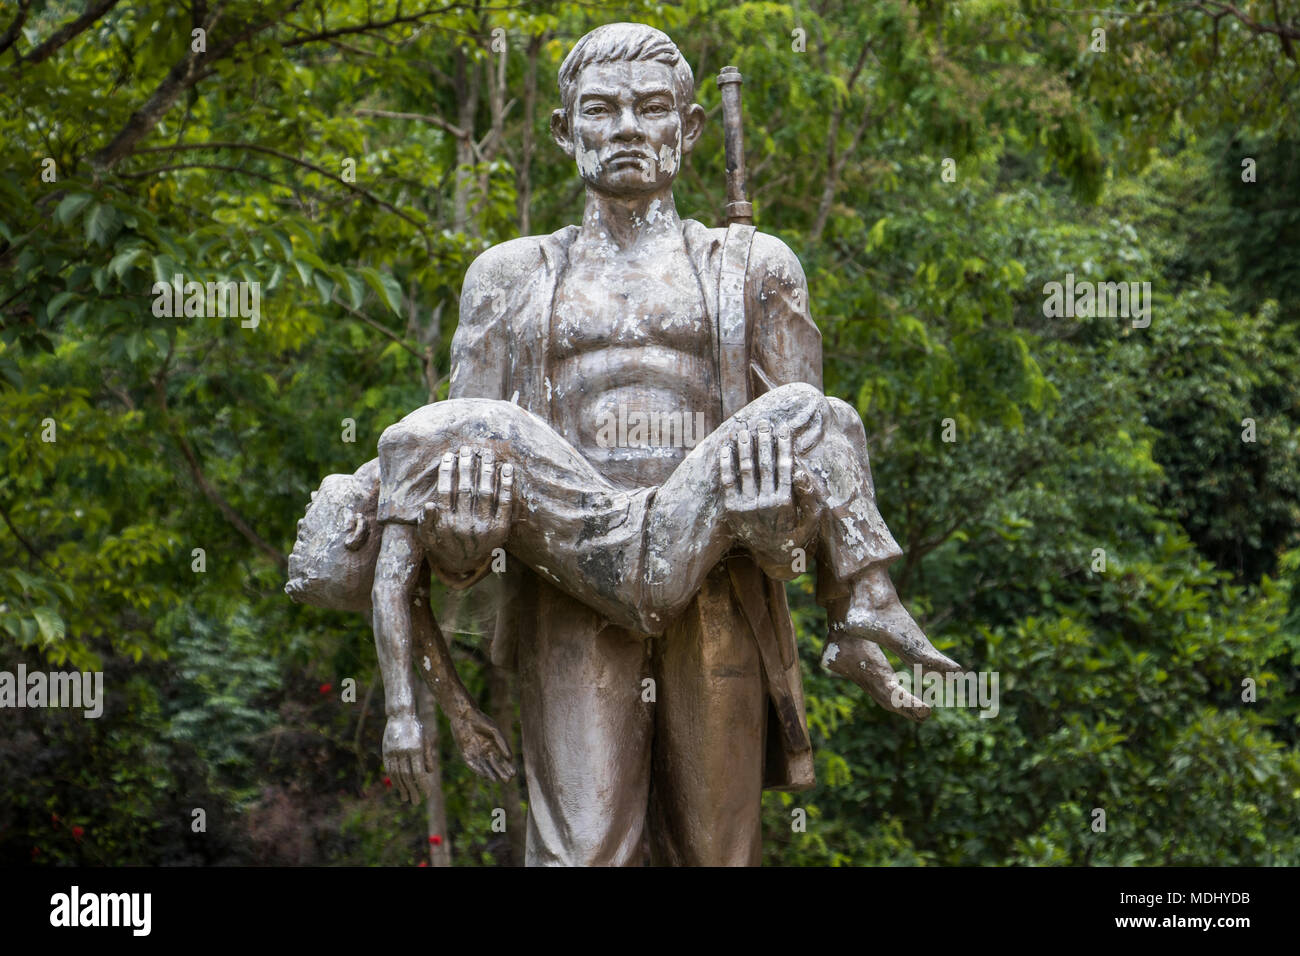 Memorial statue by Tham Piu Cave, place where on 24 November 1969, a single rocket fired from a US aircraft killed an estimated 374 people who had ... Stock Photo